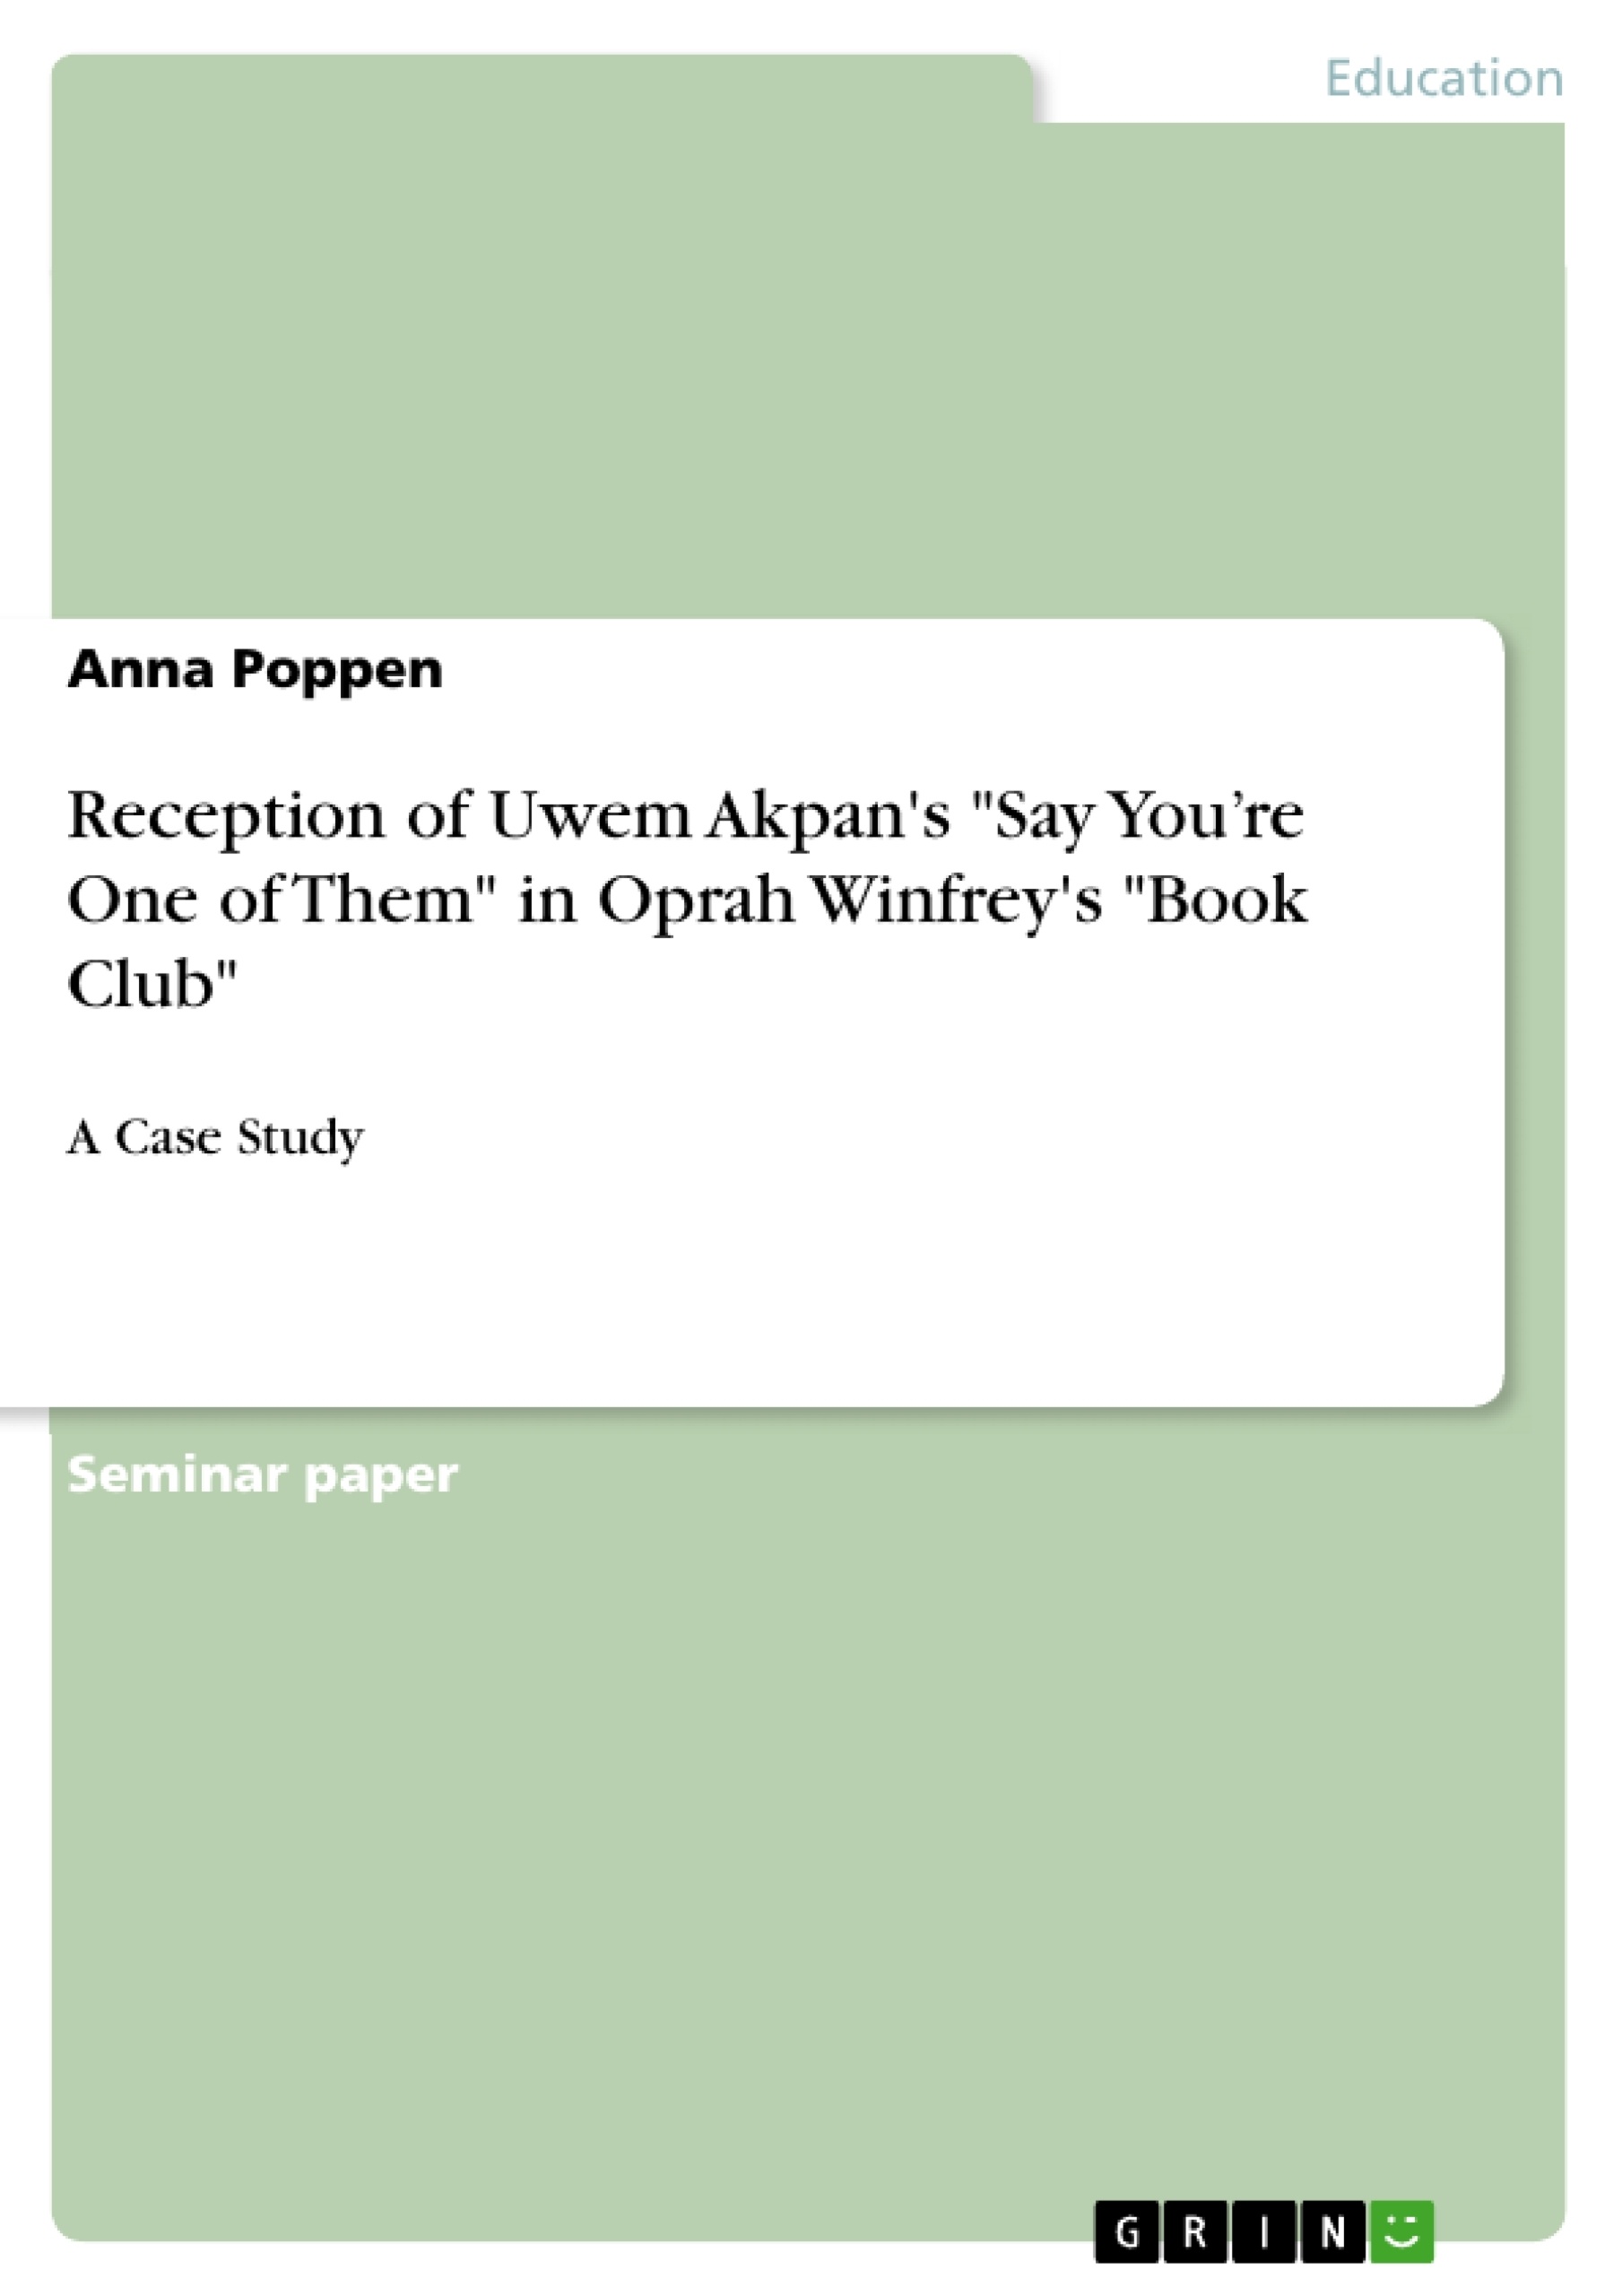 Titre: Reception of Uwem Akpan's "Say You’re One of Them" in Oprah Winfrey's "Book Club"